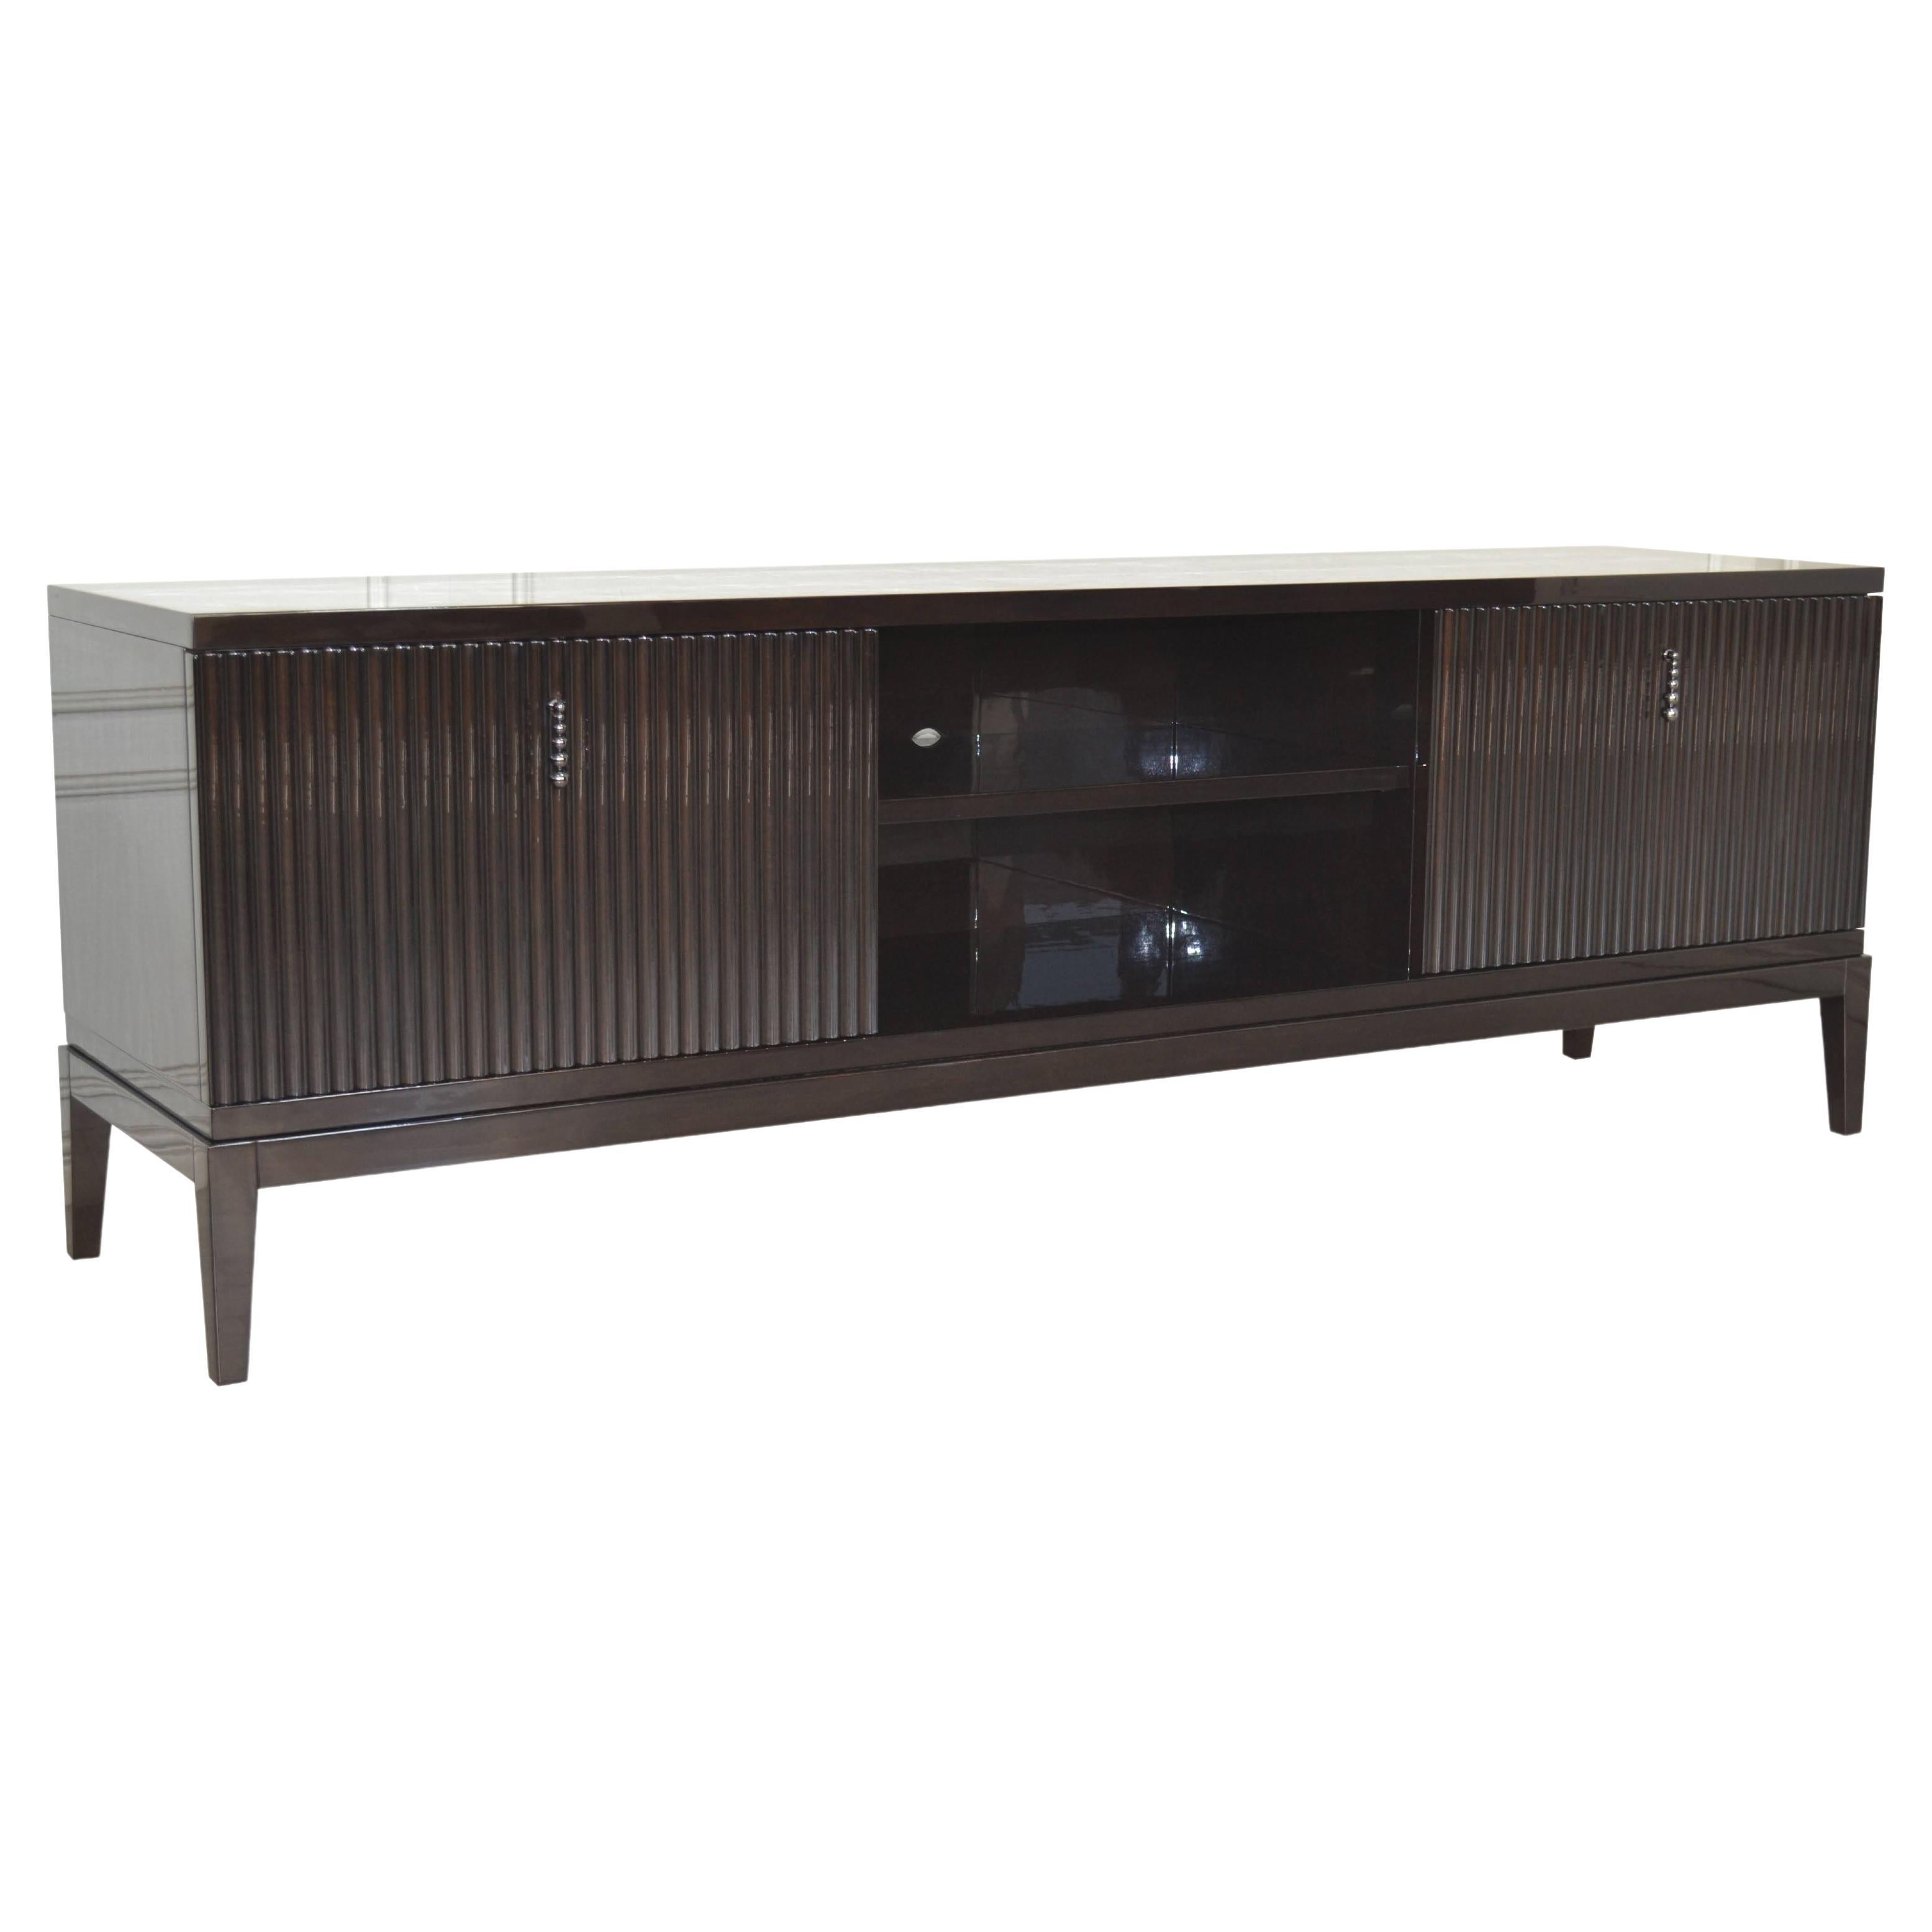 Italian Tv Sideboard in Ebony Brown Color with Drawers For Sale